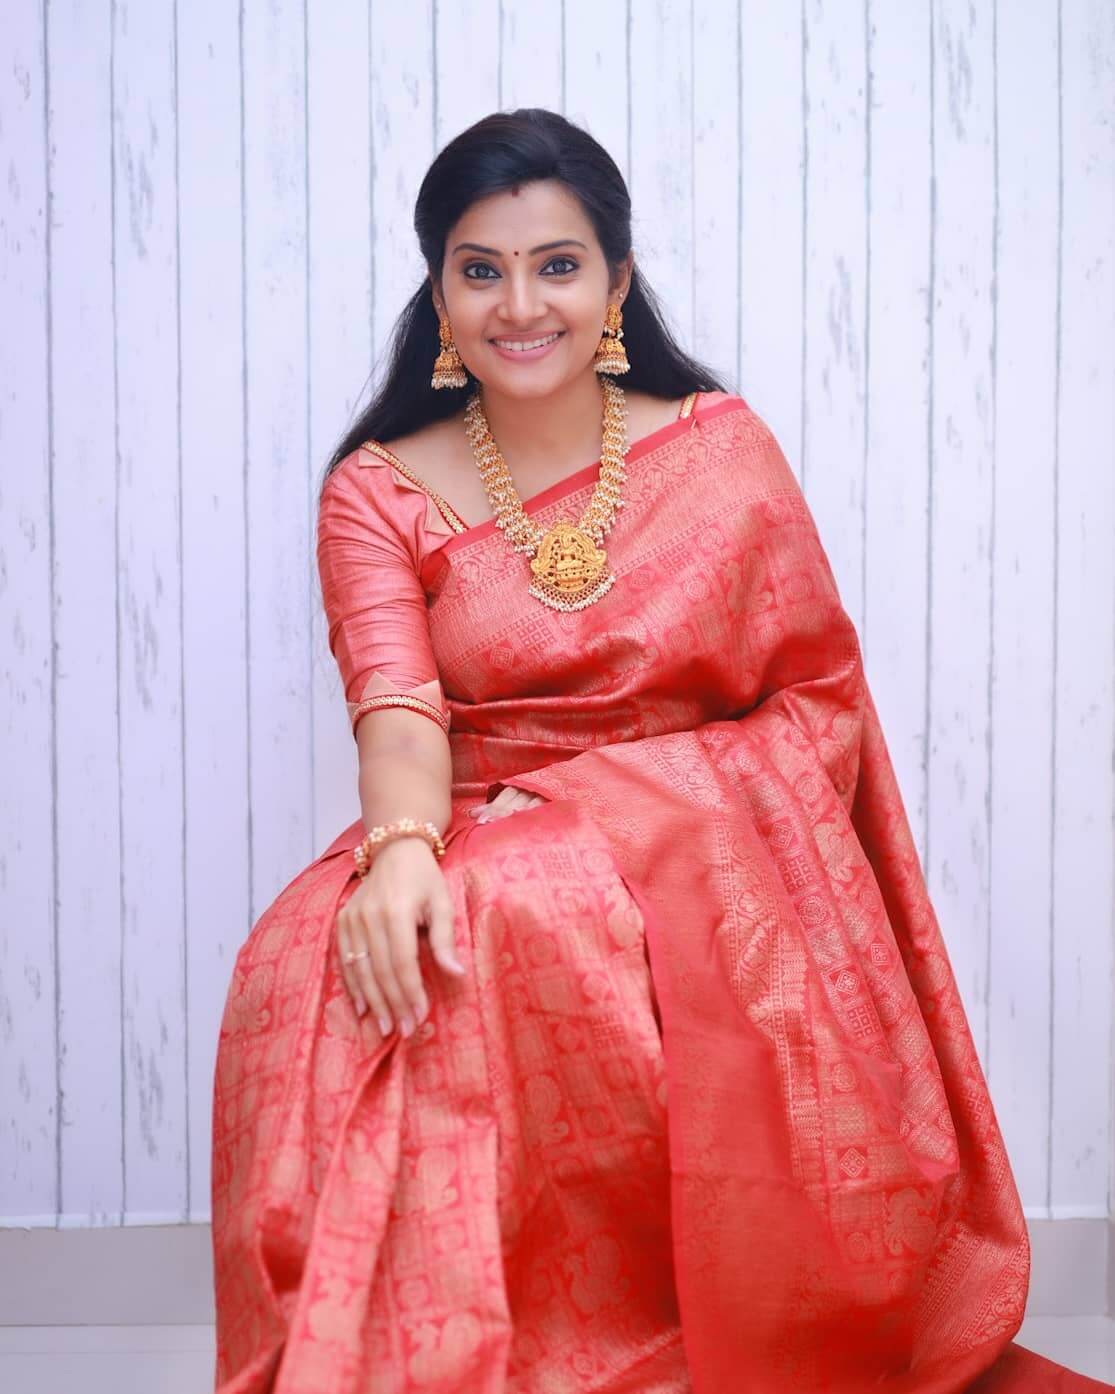 Shruthi Raj In Red & Gold Blend Silk Saree With Beautiful Gold Jewellery Perfect Look For Wedding Ceremony